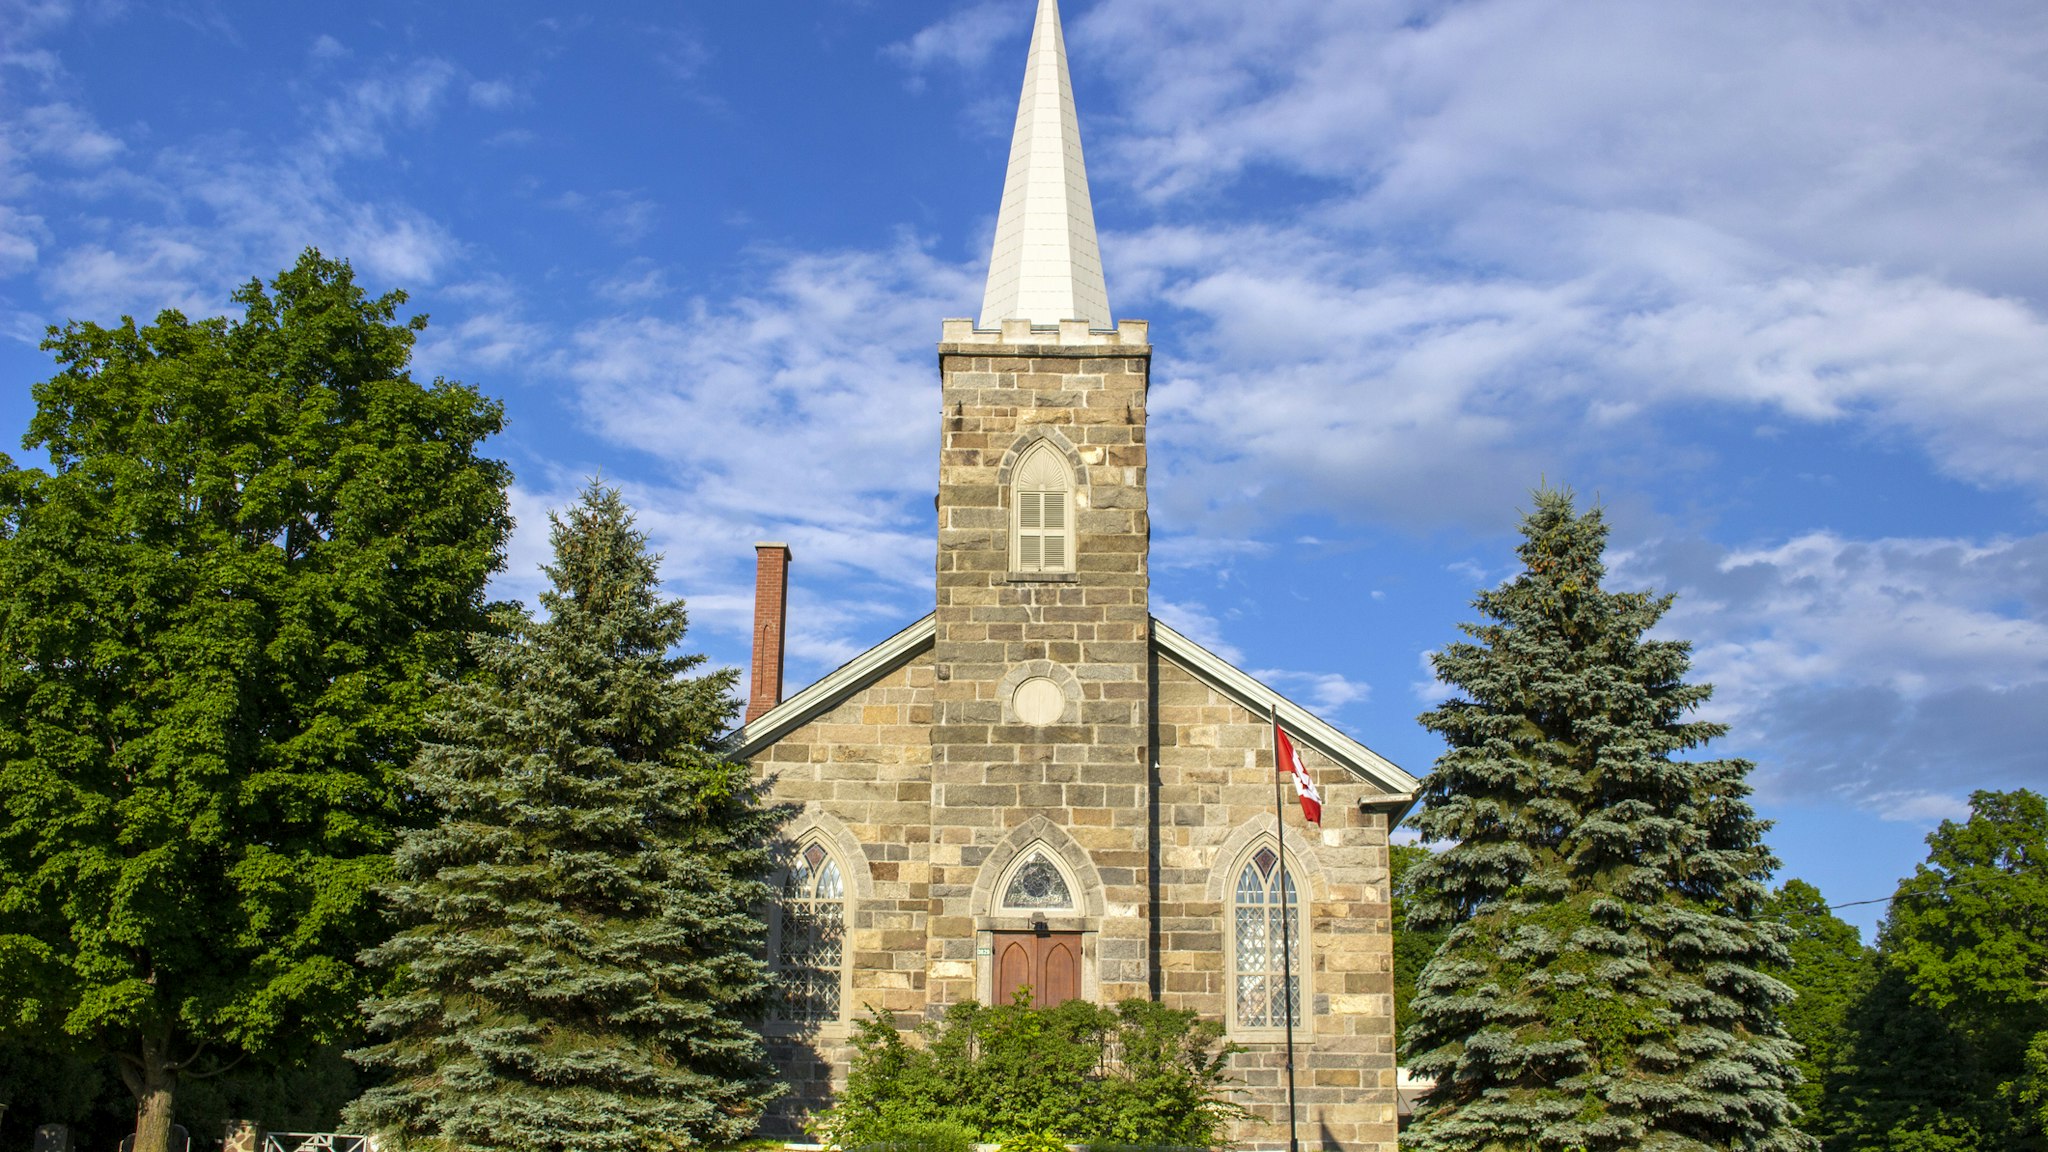 View of All Saints Anglican Church in Dunham, Eastern Townships, Quebec, Canada.